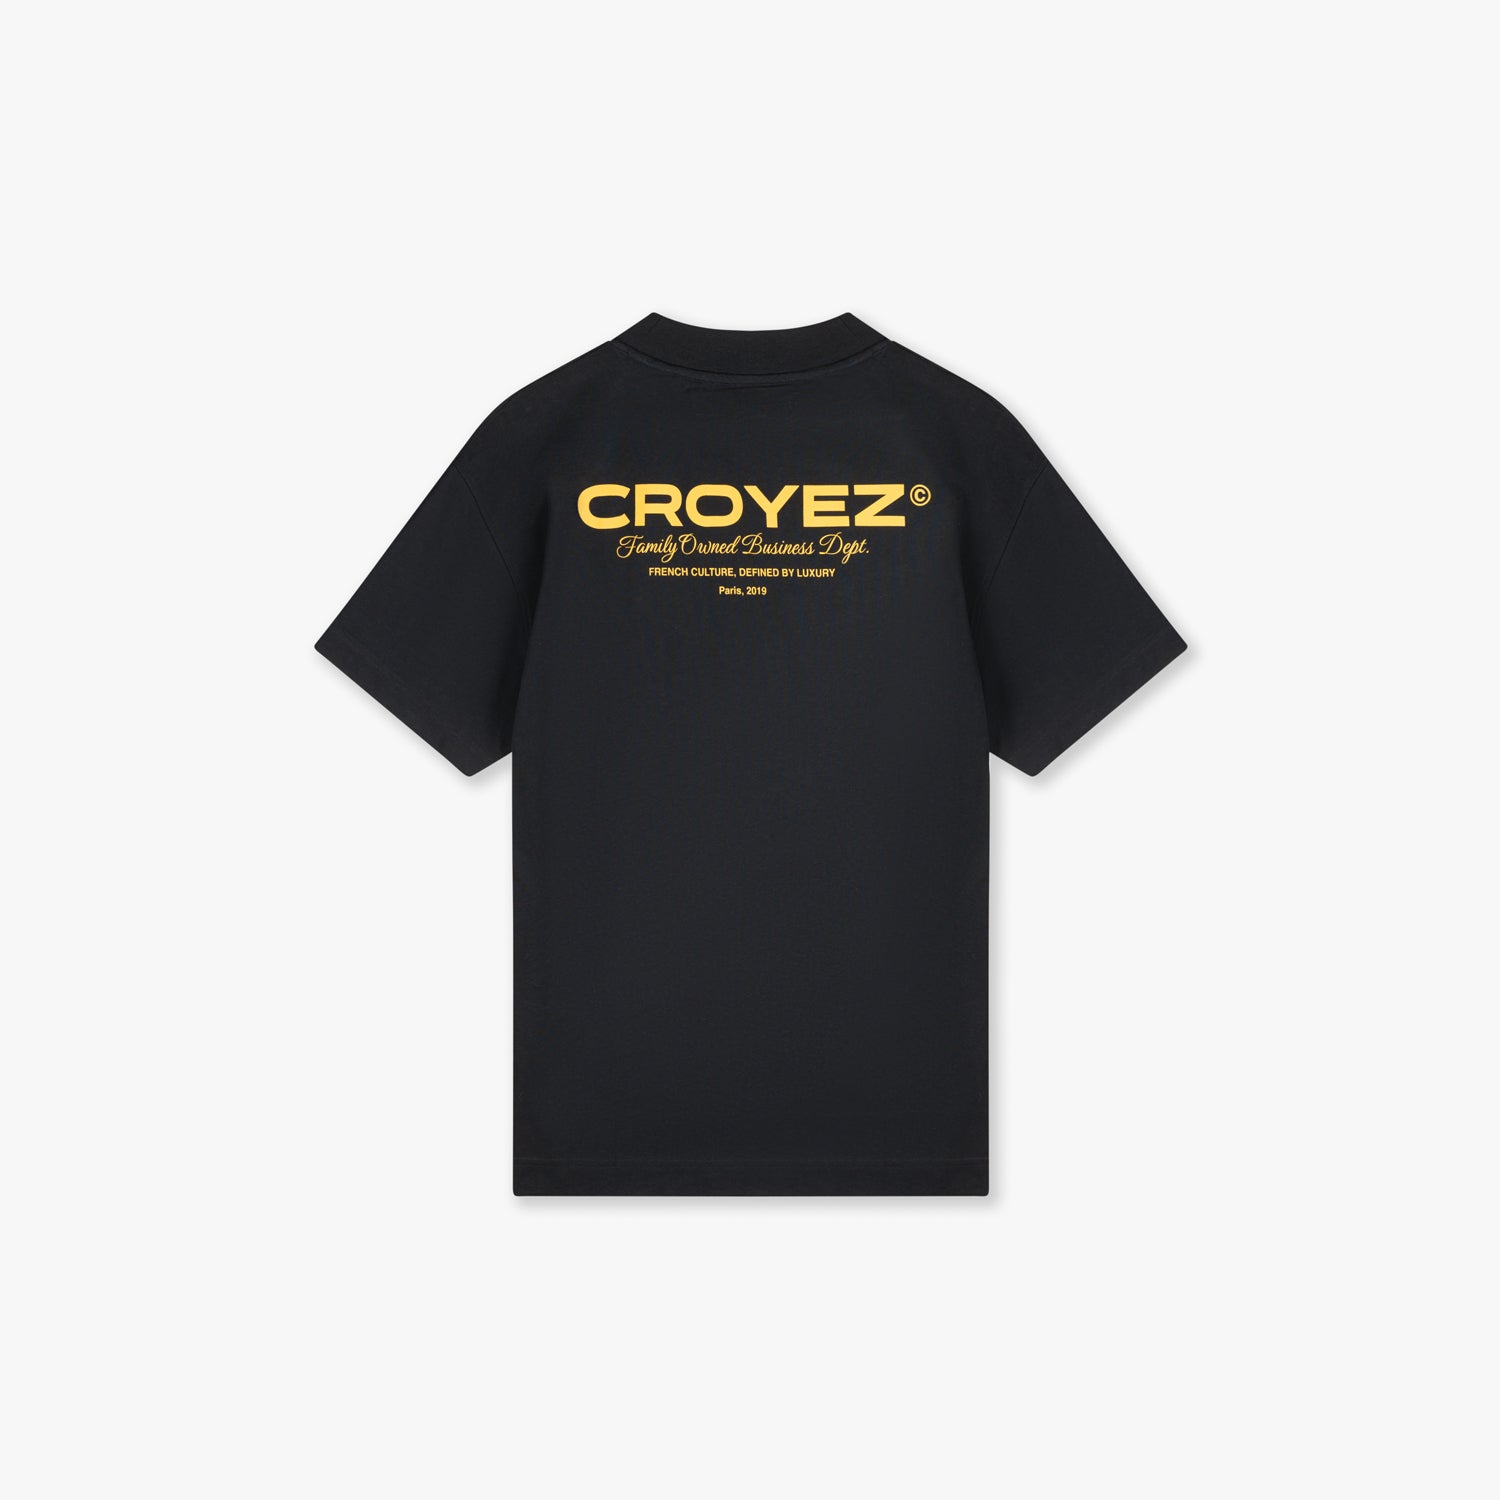 CROYEZ FAMILY OWNED BUSINESS T-SHIRT - BLACK/YELLOW